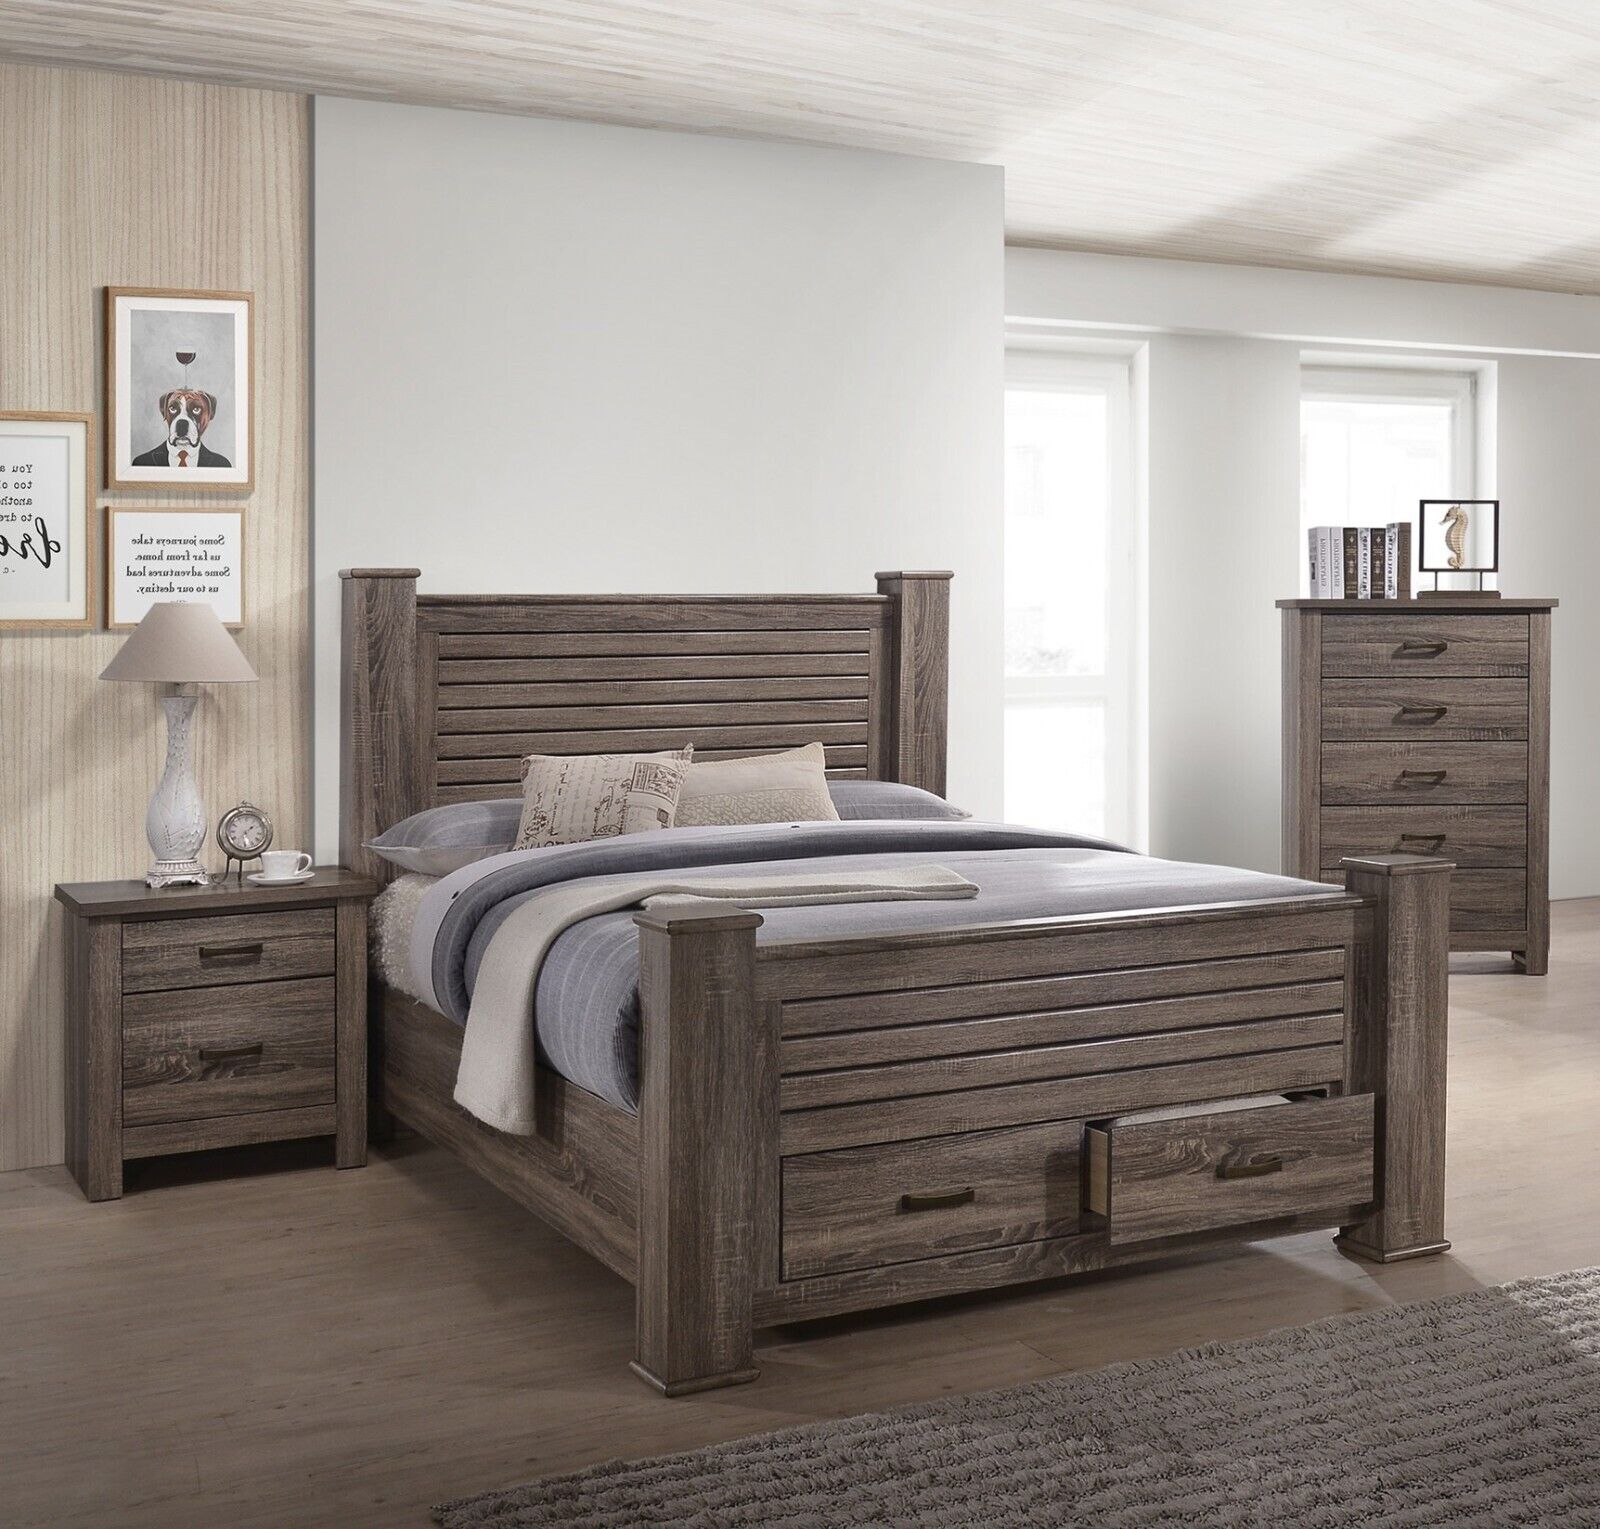 Esofastore 3pc Bedroom Furniture Set Natural Finish Queen Size Bed 2x Nightstands Transitional Style Functional Unique Bed